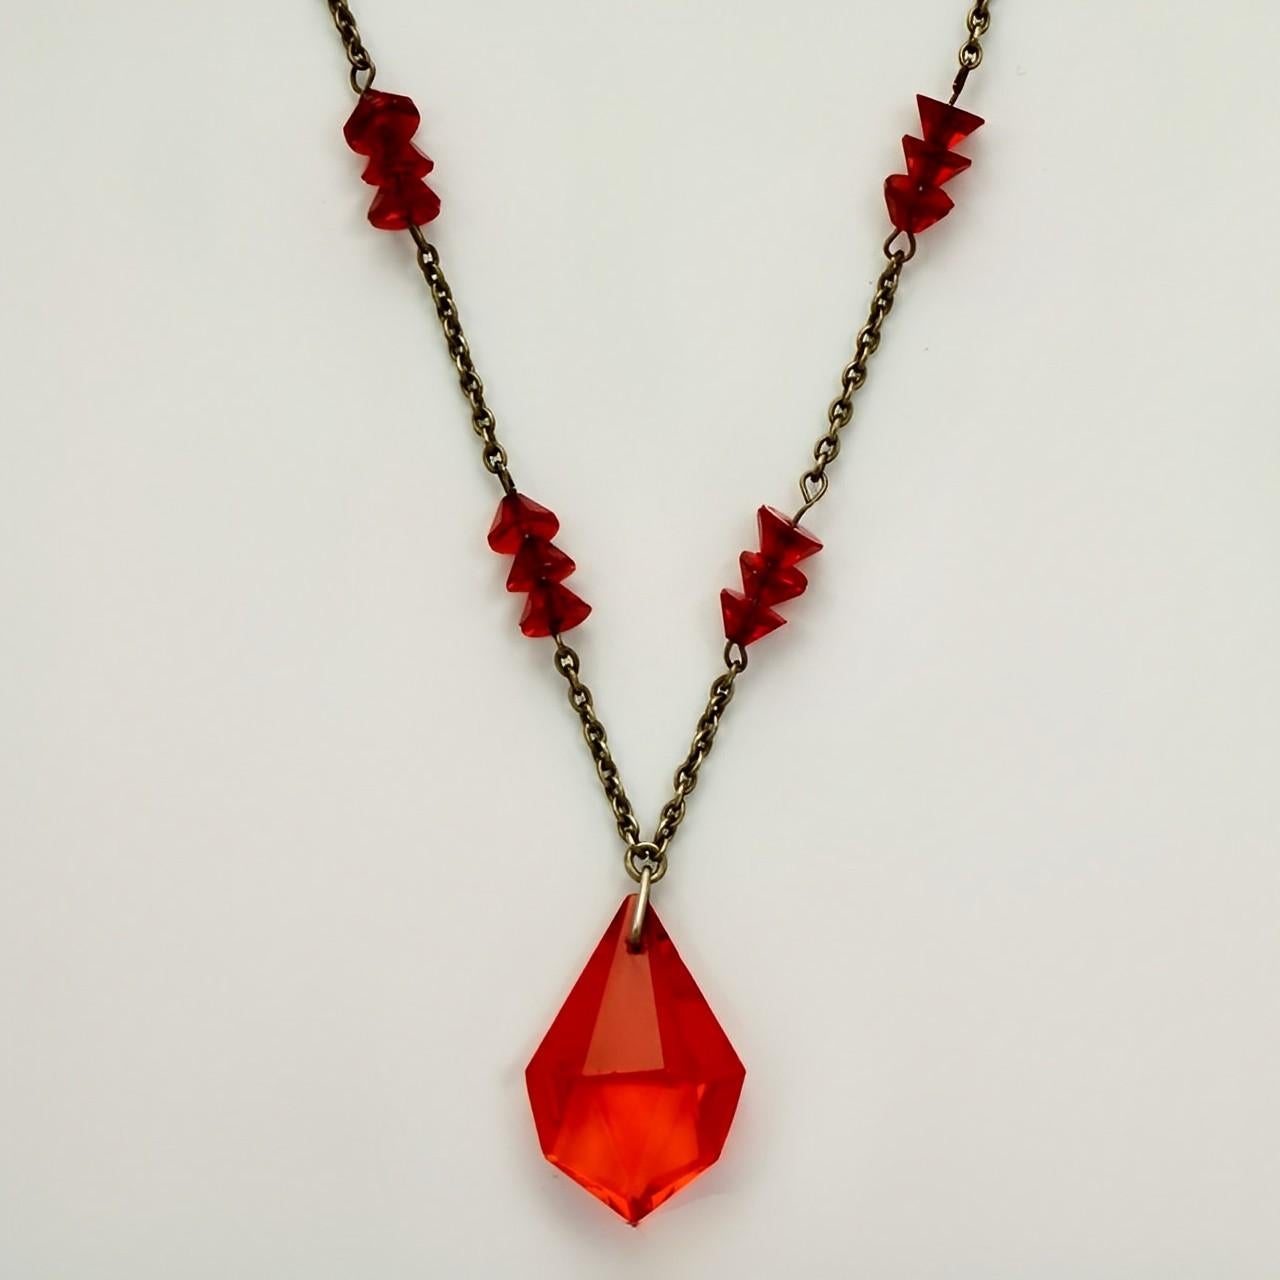 Art Deco silver tone chain necklace featuring red glass crystal beads, and a lovely drop pendant. The pendant is an orange red colour. The chain links are soldered. Length 45.5 cm / 17.9 inches, and the pendant length is 2.3 cm / .9 inch.

This is a